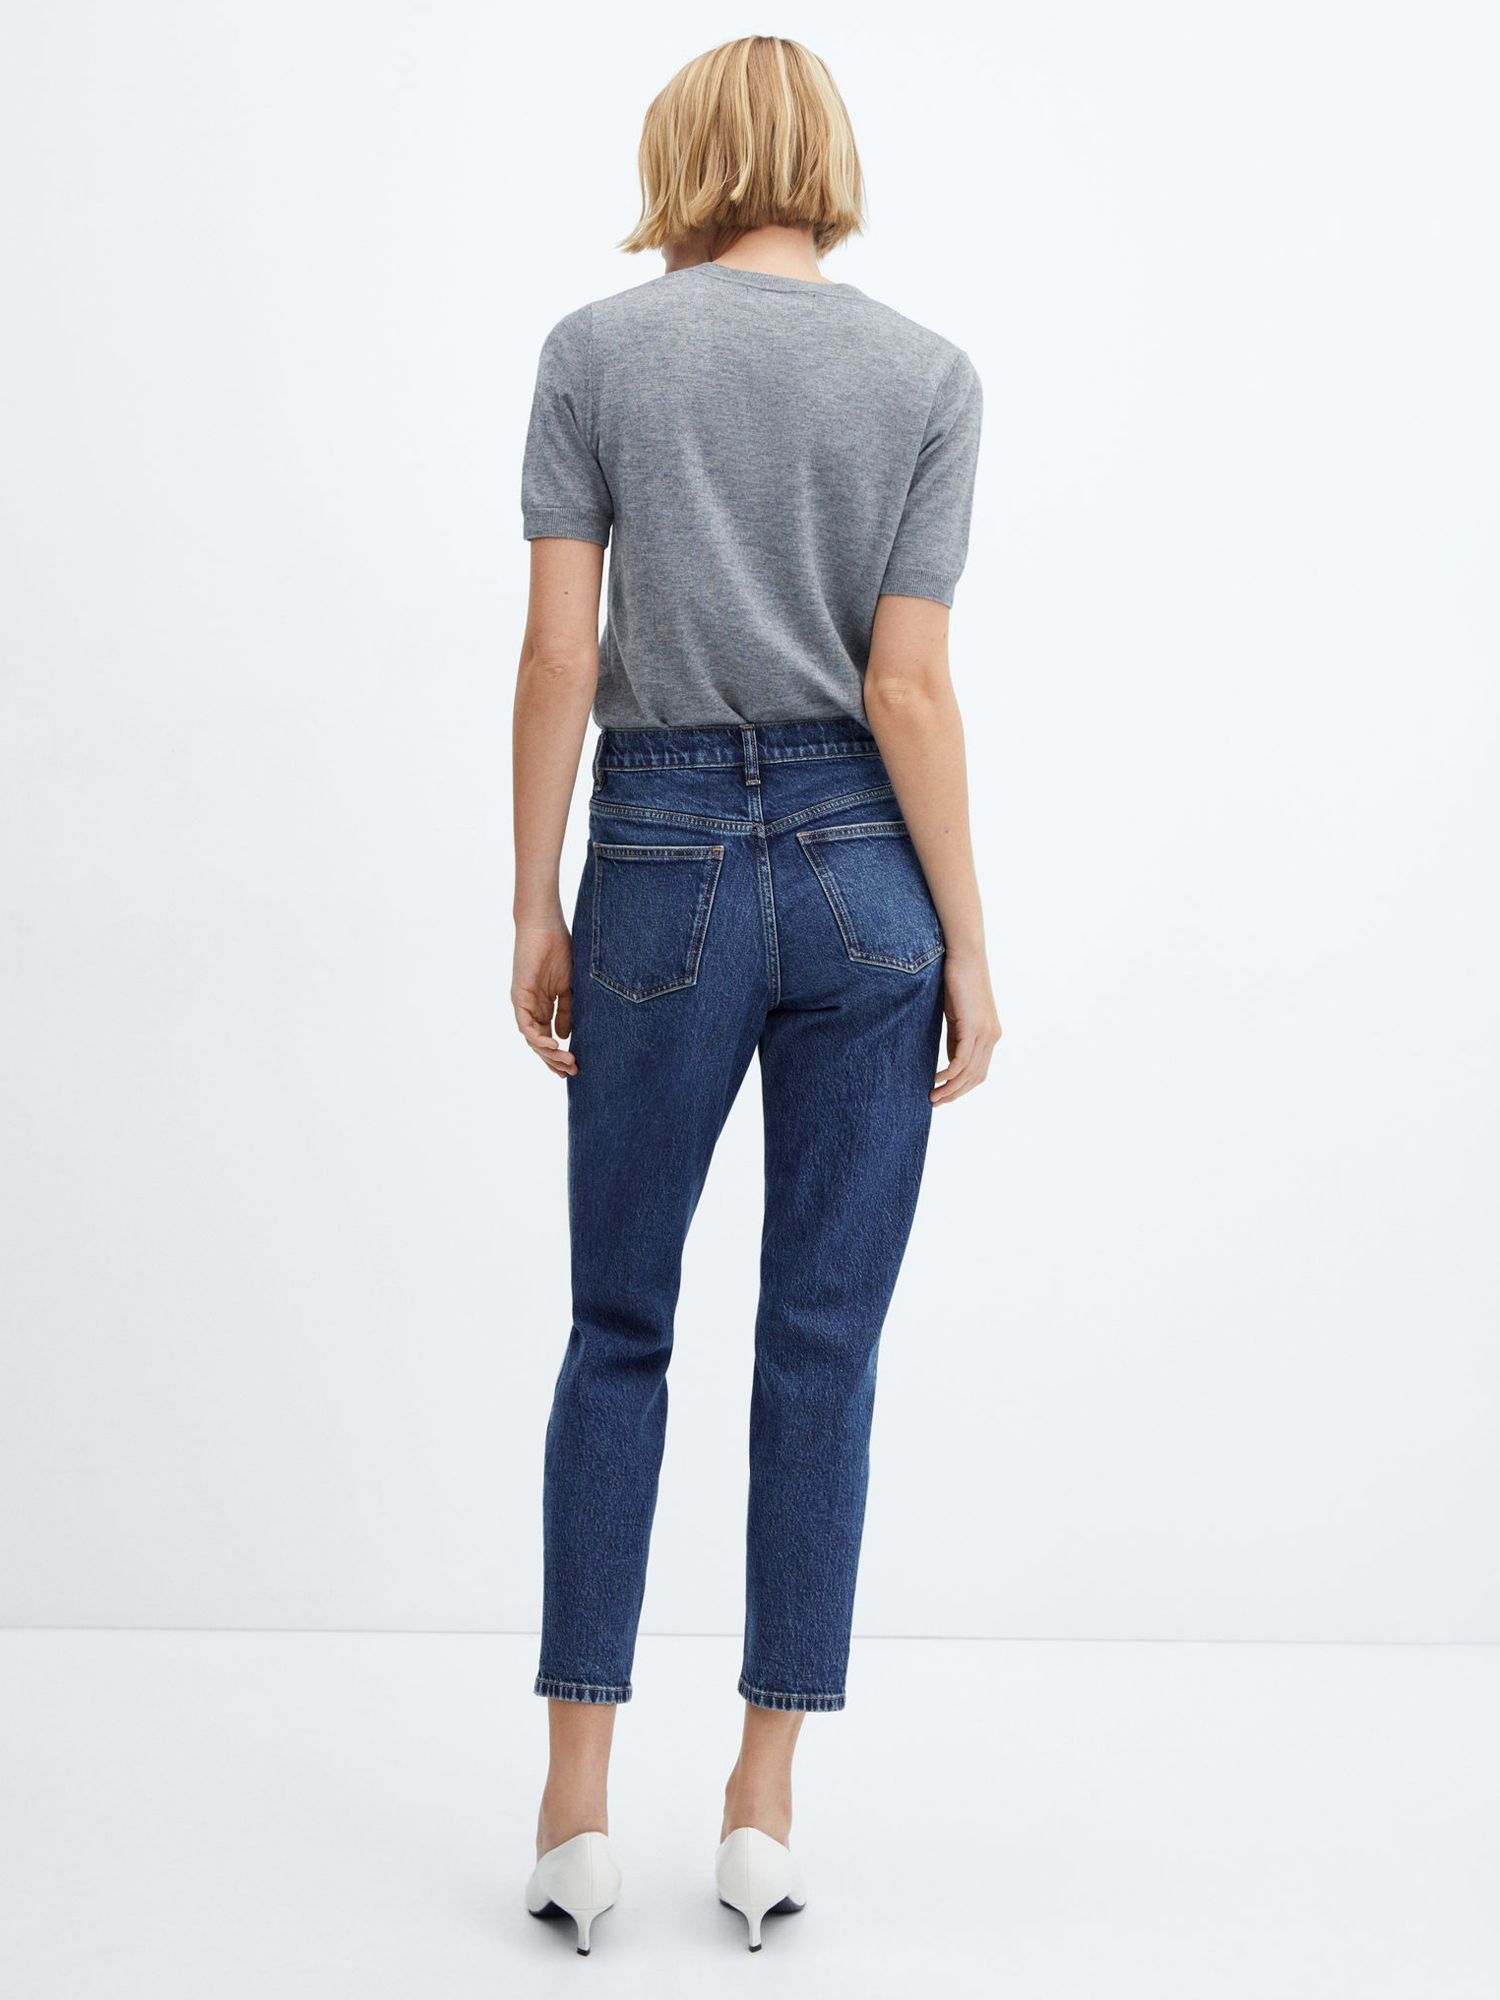 Mango New Mom Cropped Jeans, Open Blue, 4